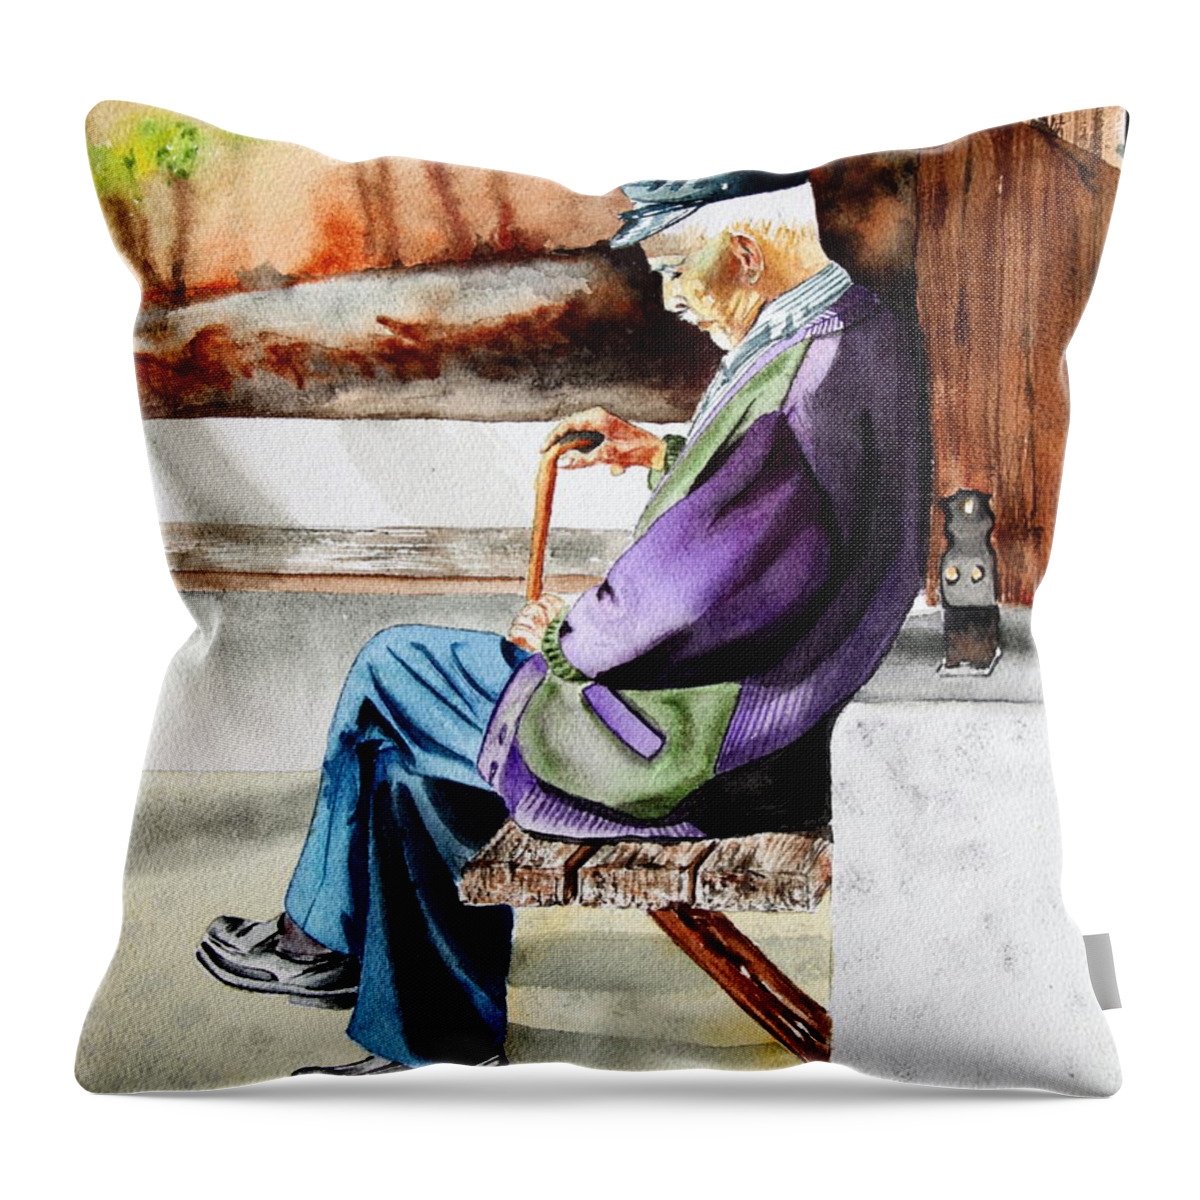 Greece Throw Pillow featuring the painting Afternoon Nap by Maria Barry